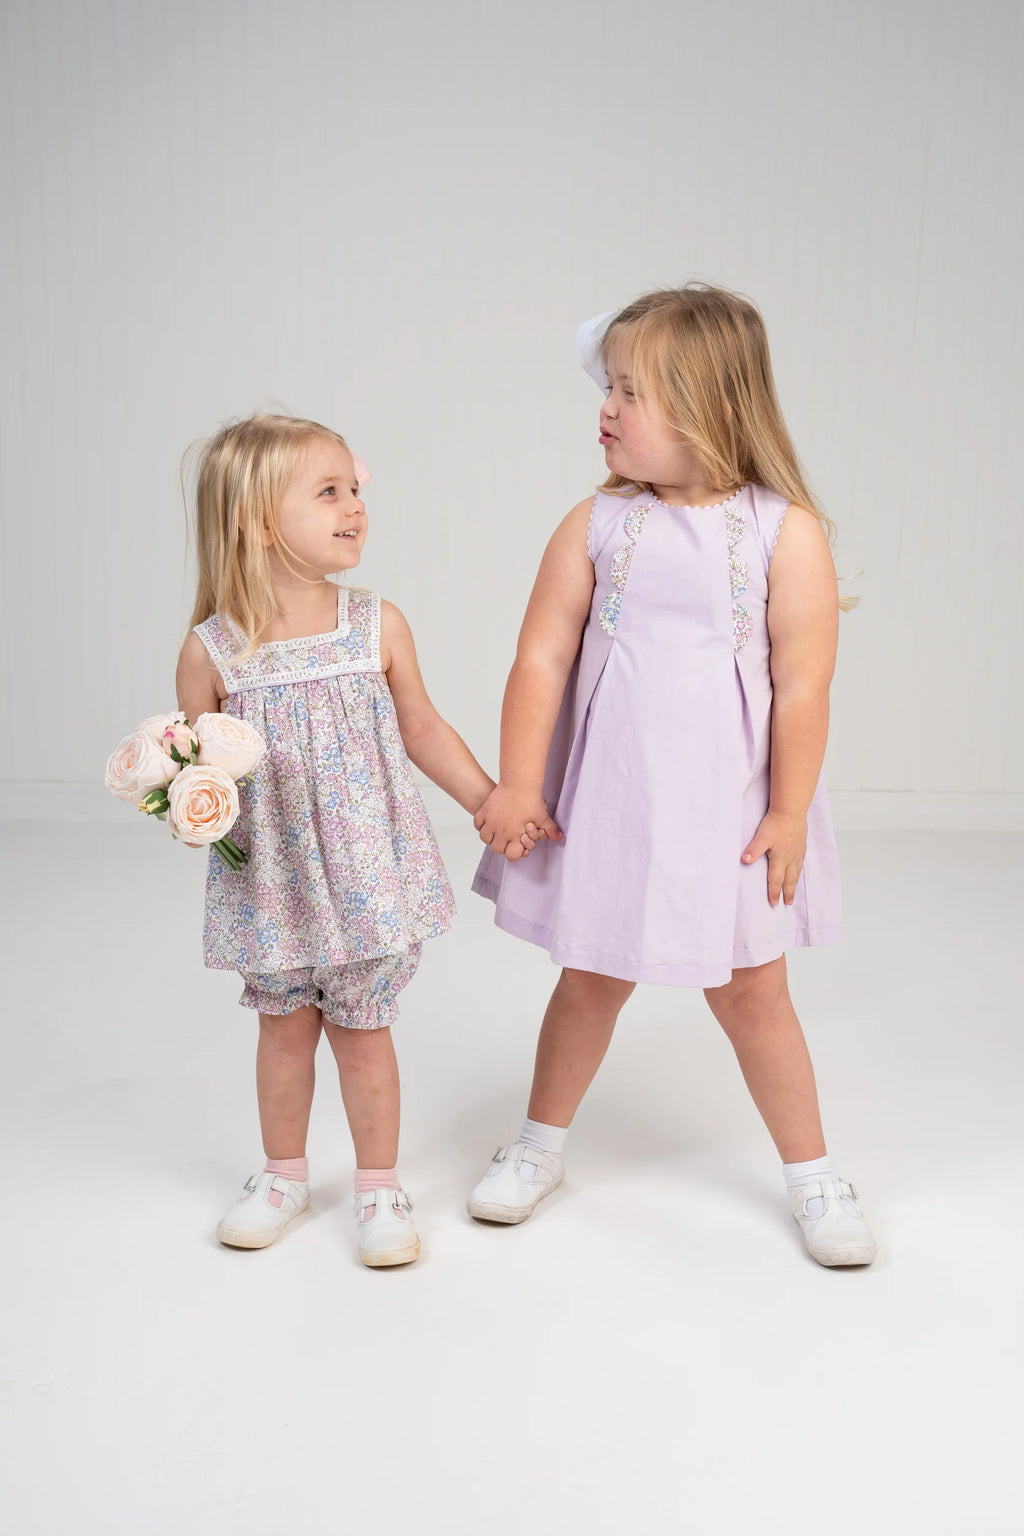 THE OAKS RYLEIGH LILAC FLORAL BLOOMER SET